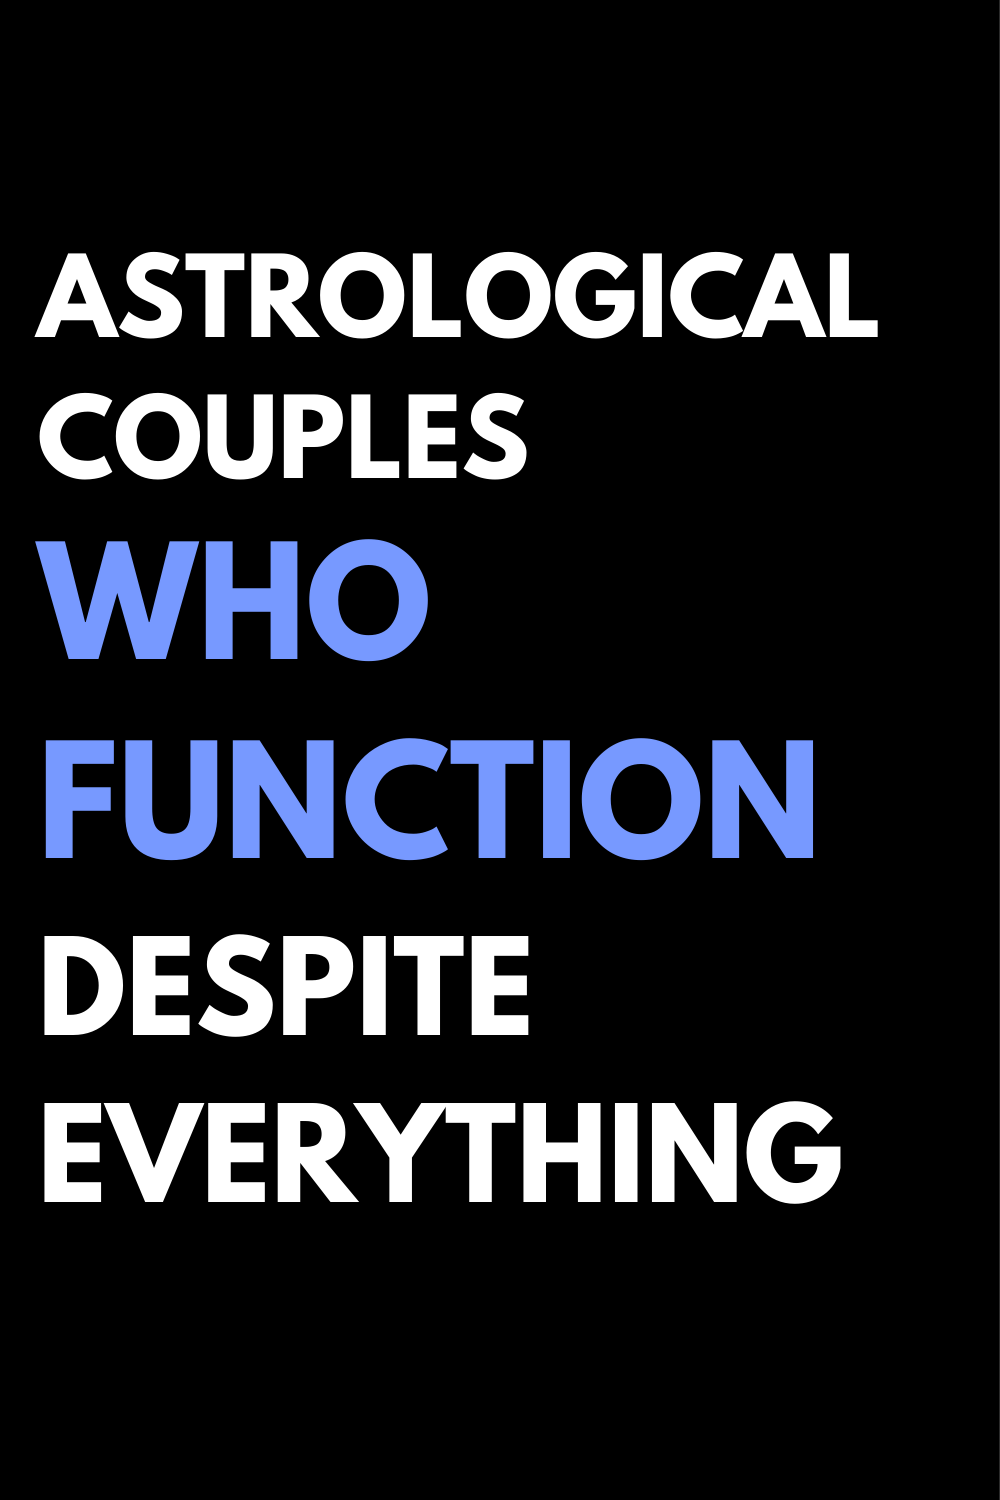 Astrological couples who function despite everything